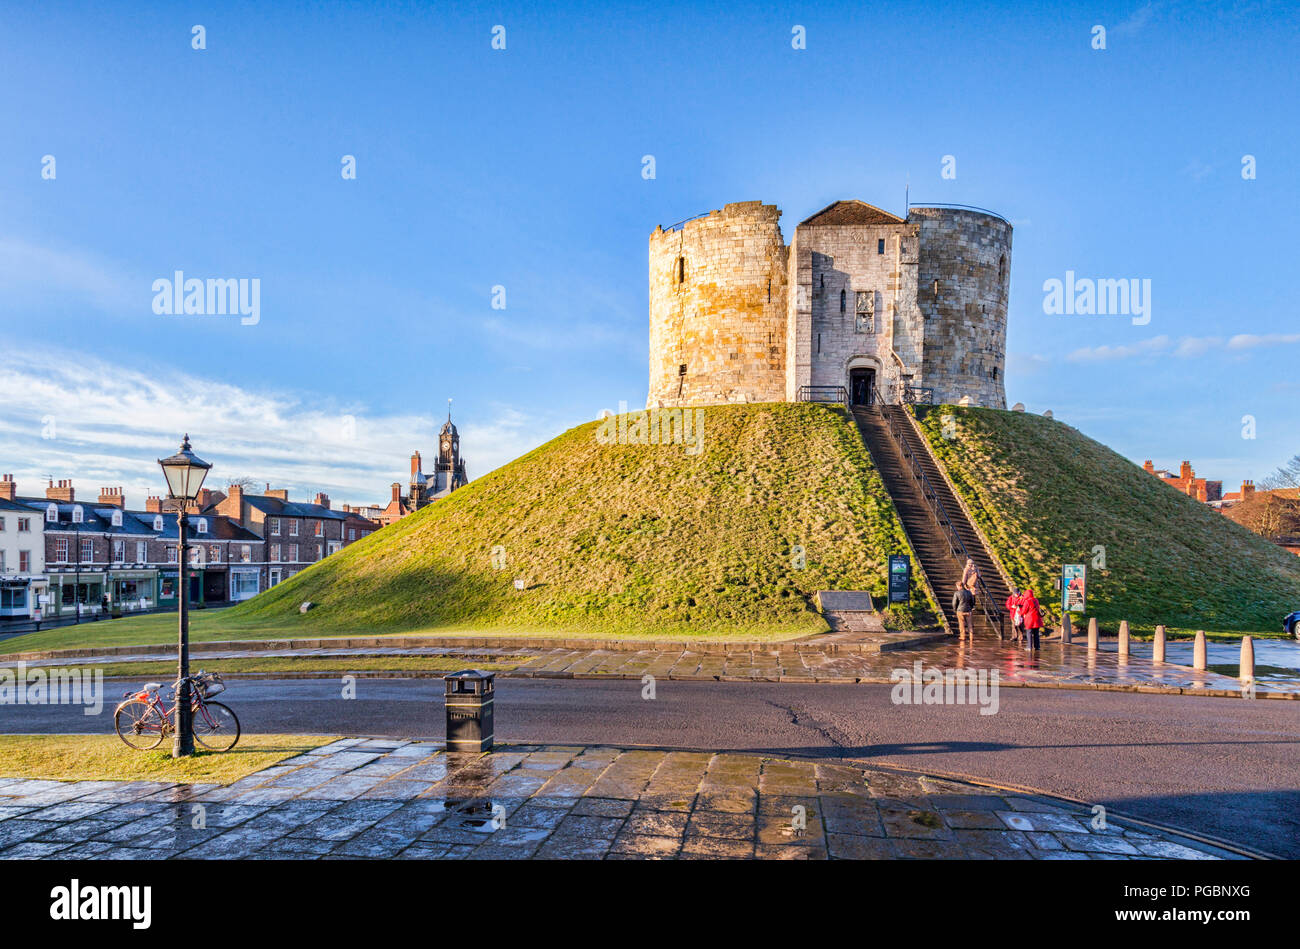 Sunshine after snow, Cliffords Tower, York, North Yorkshire, England, UK. Stock Photo